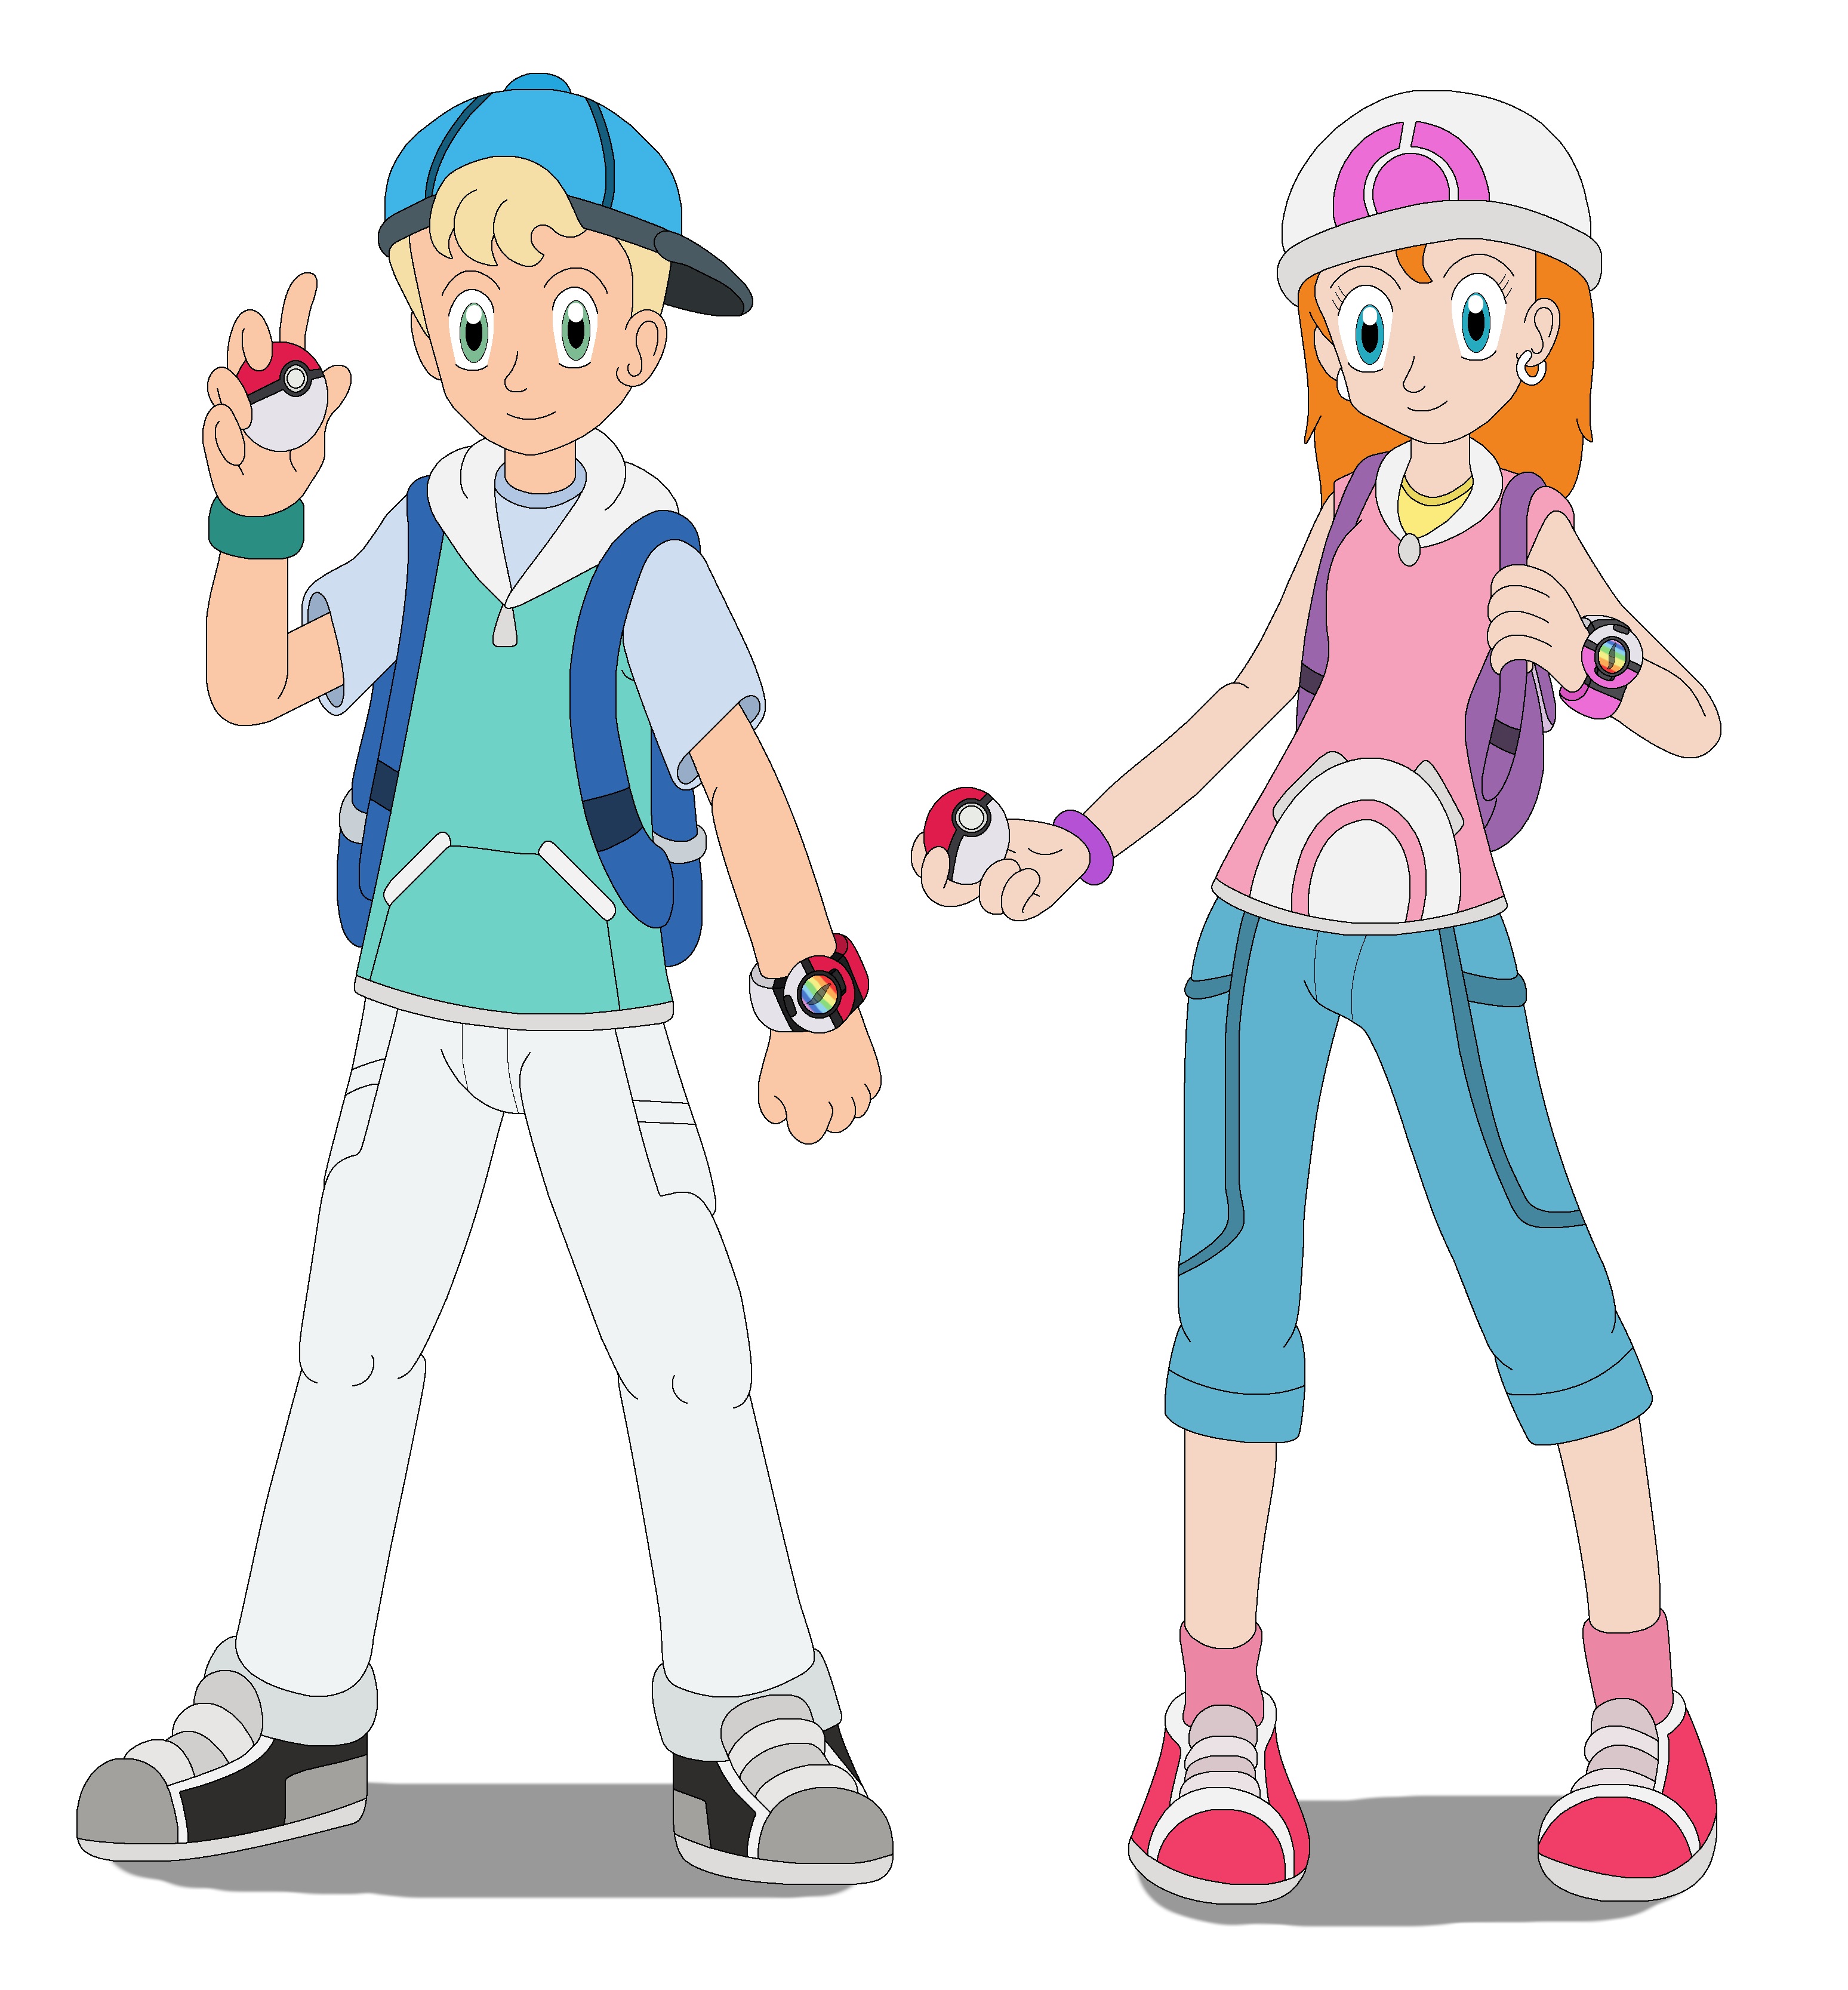 Jimmy and Sarah the Pokemon Trainers